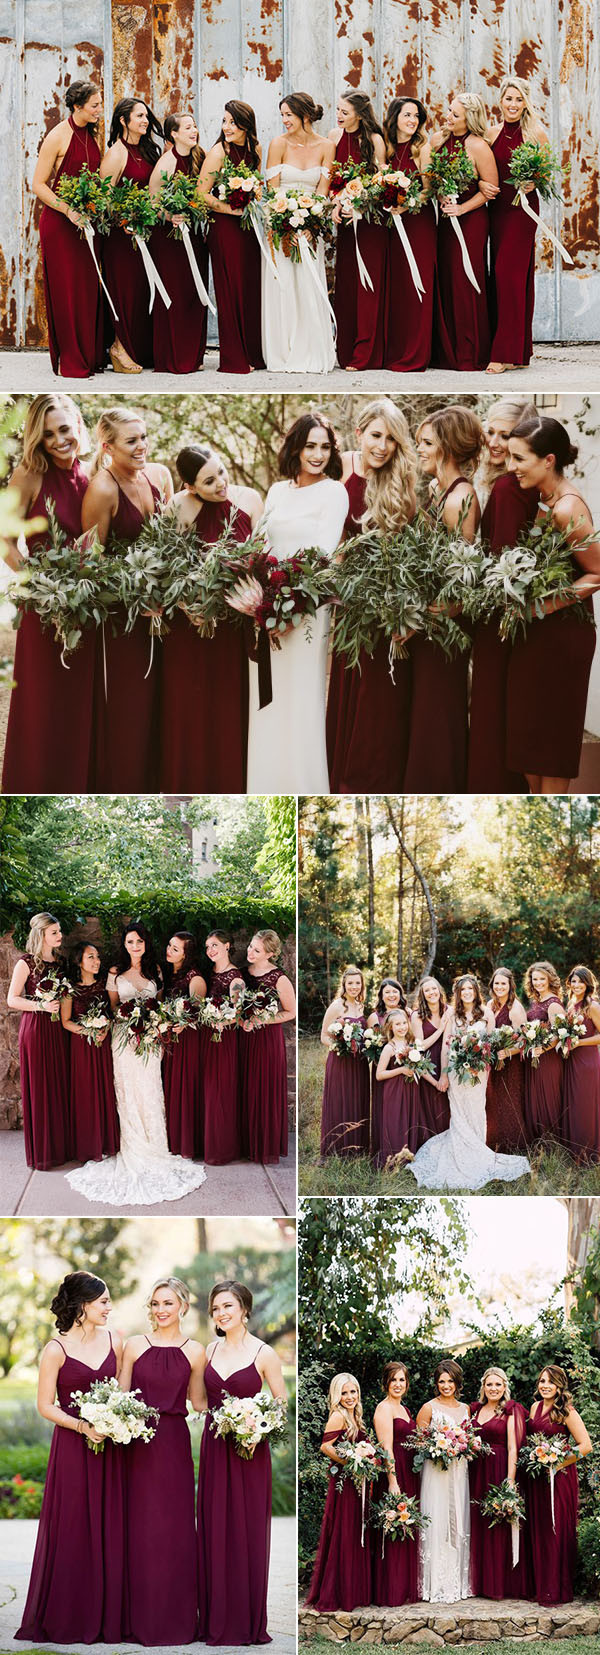 Wedding Color Ideas For Fall
 50 Refined Burgundy and Marsala Wedding Color Ideas for